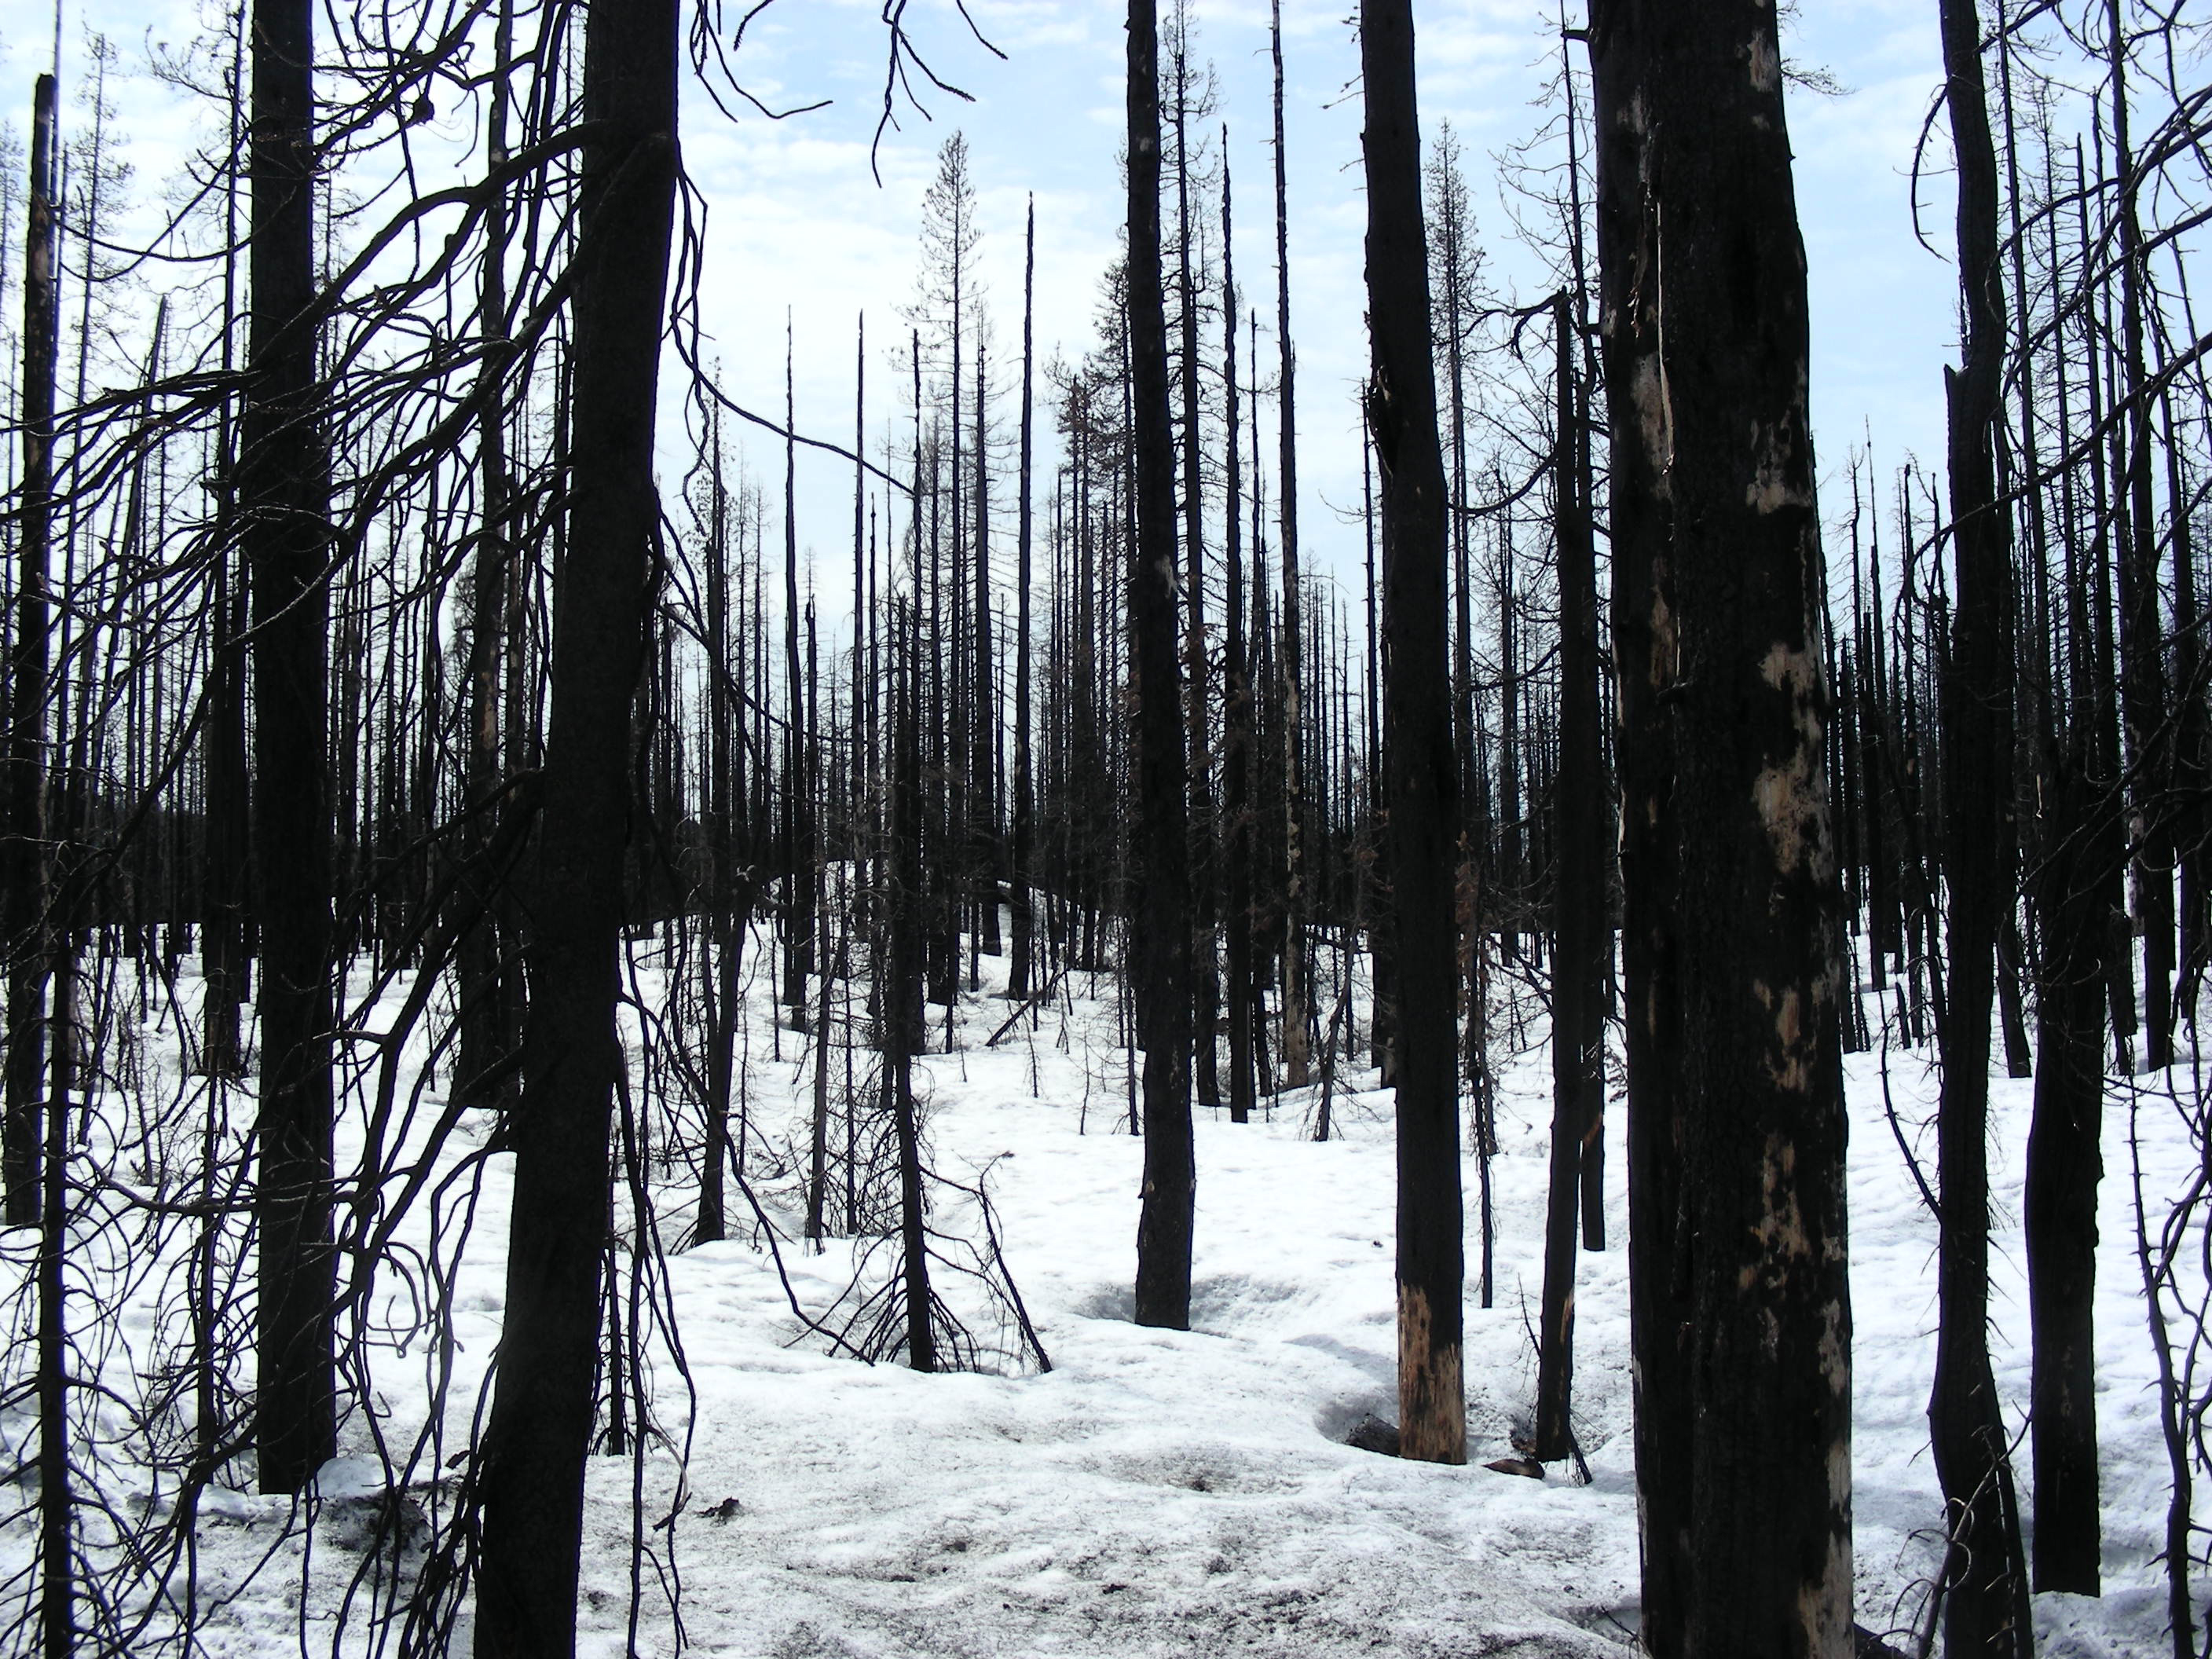 Post-fire recovery depends on Cascade snow cover, study says - OPB